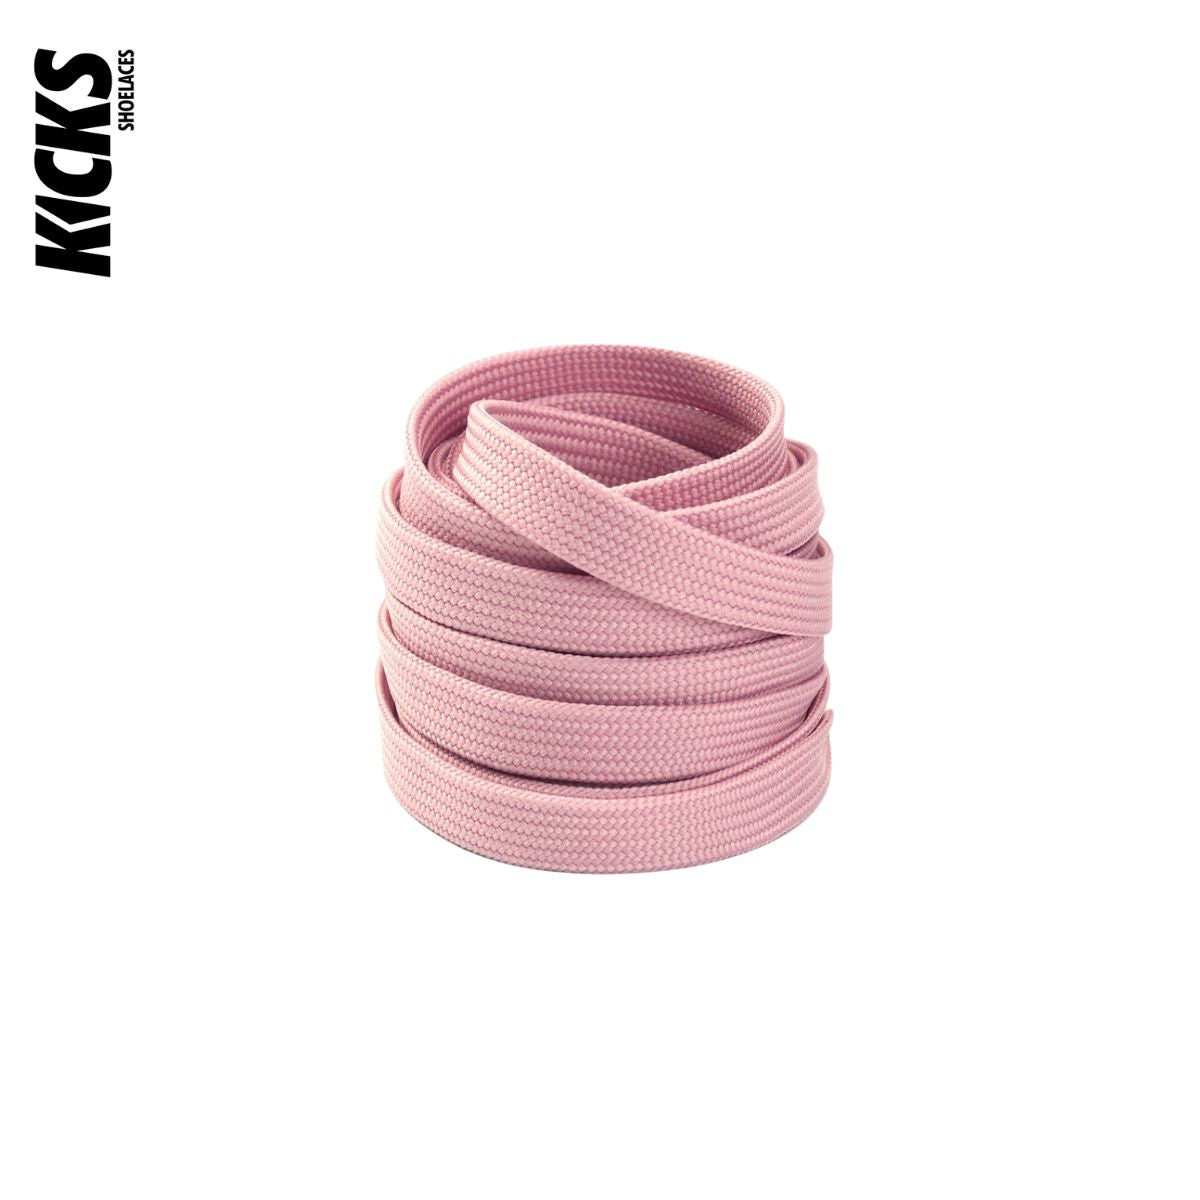 Blush Nike Dunks Shoelace Replacements